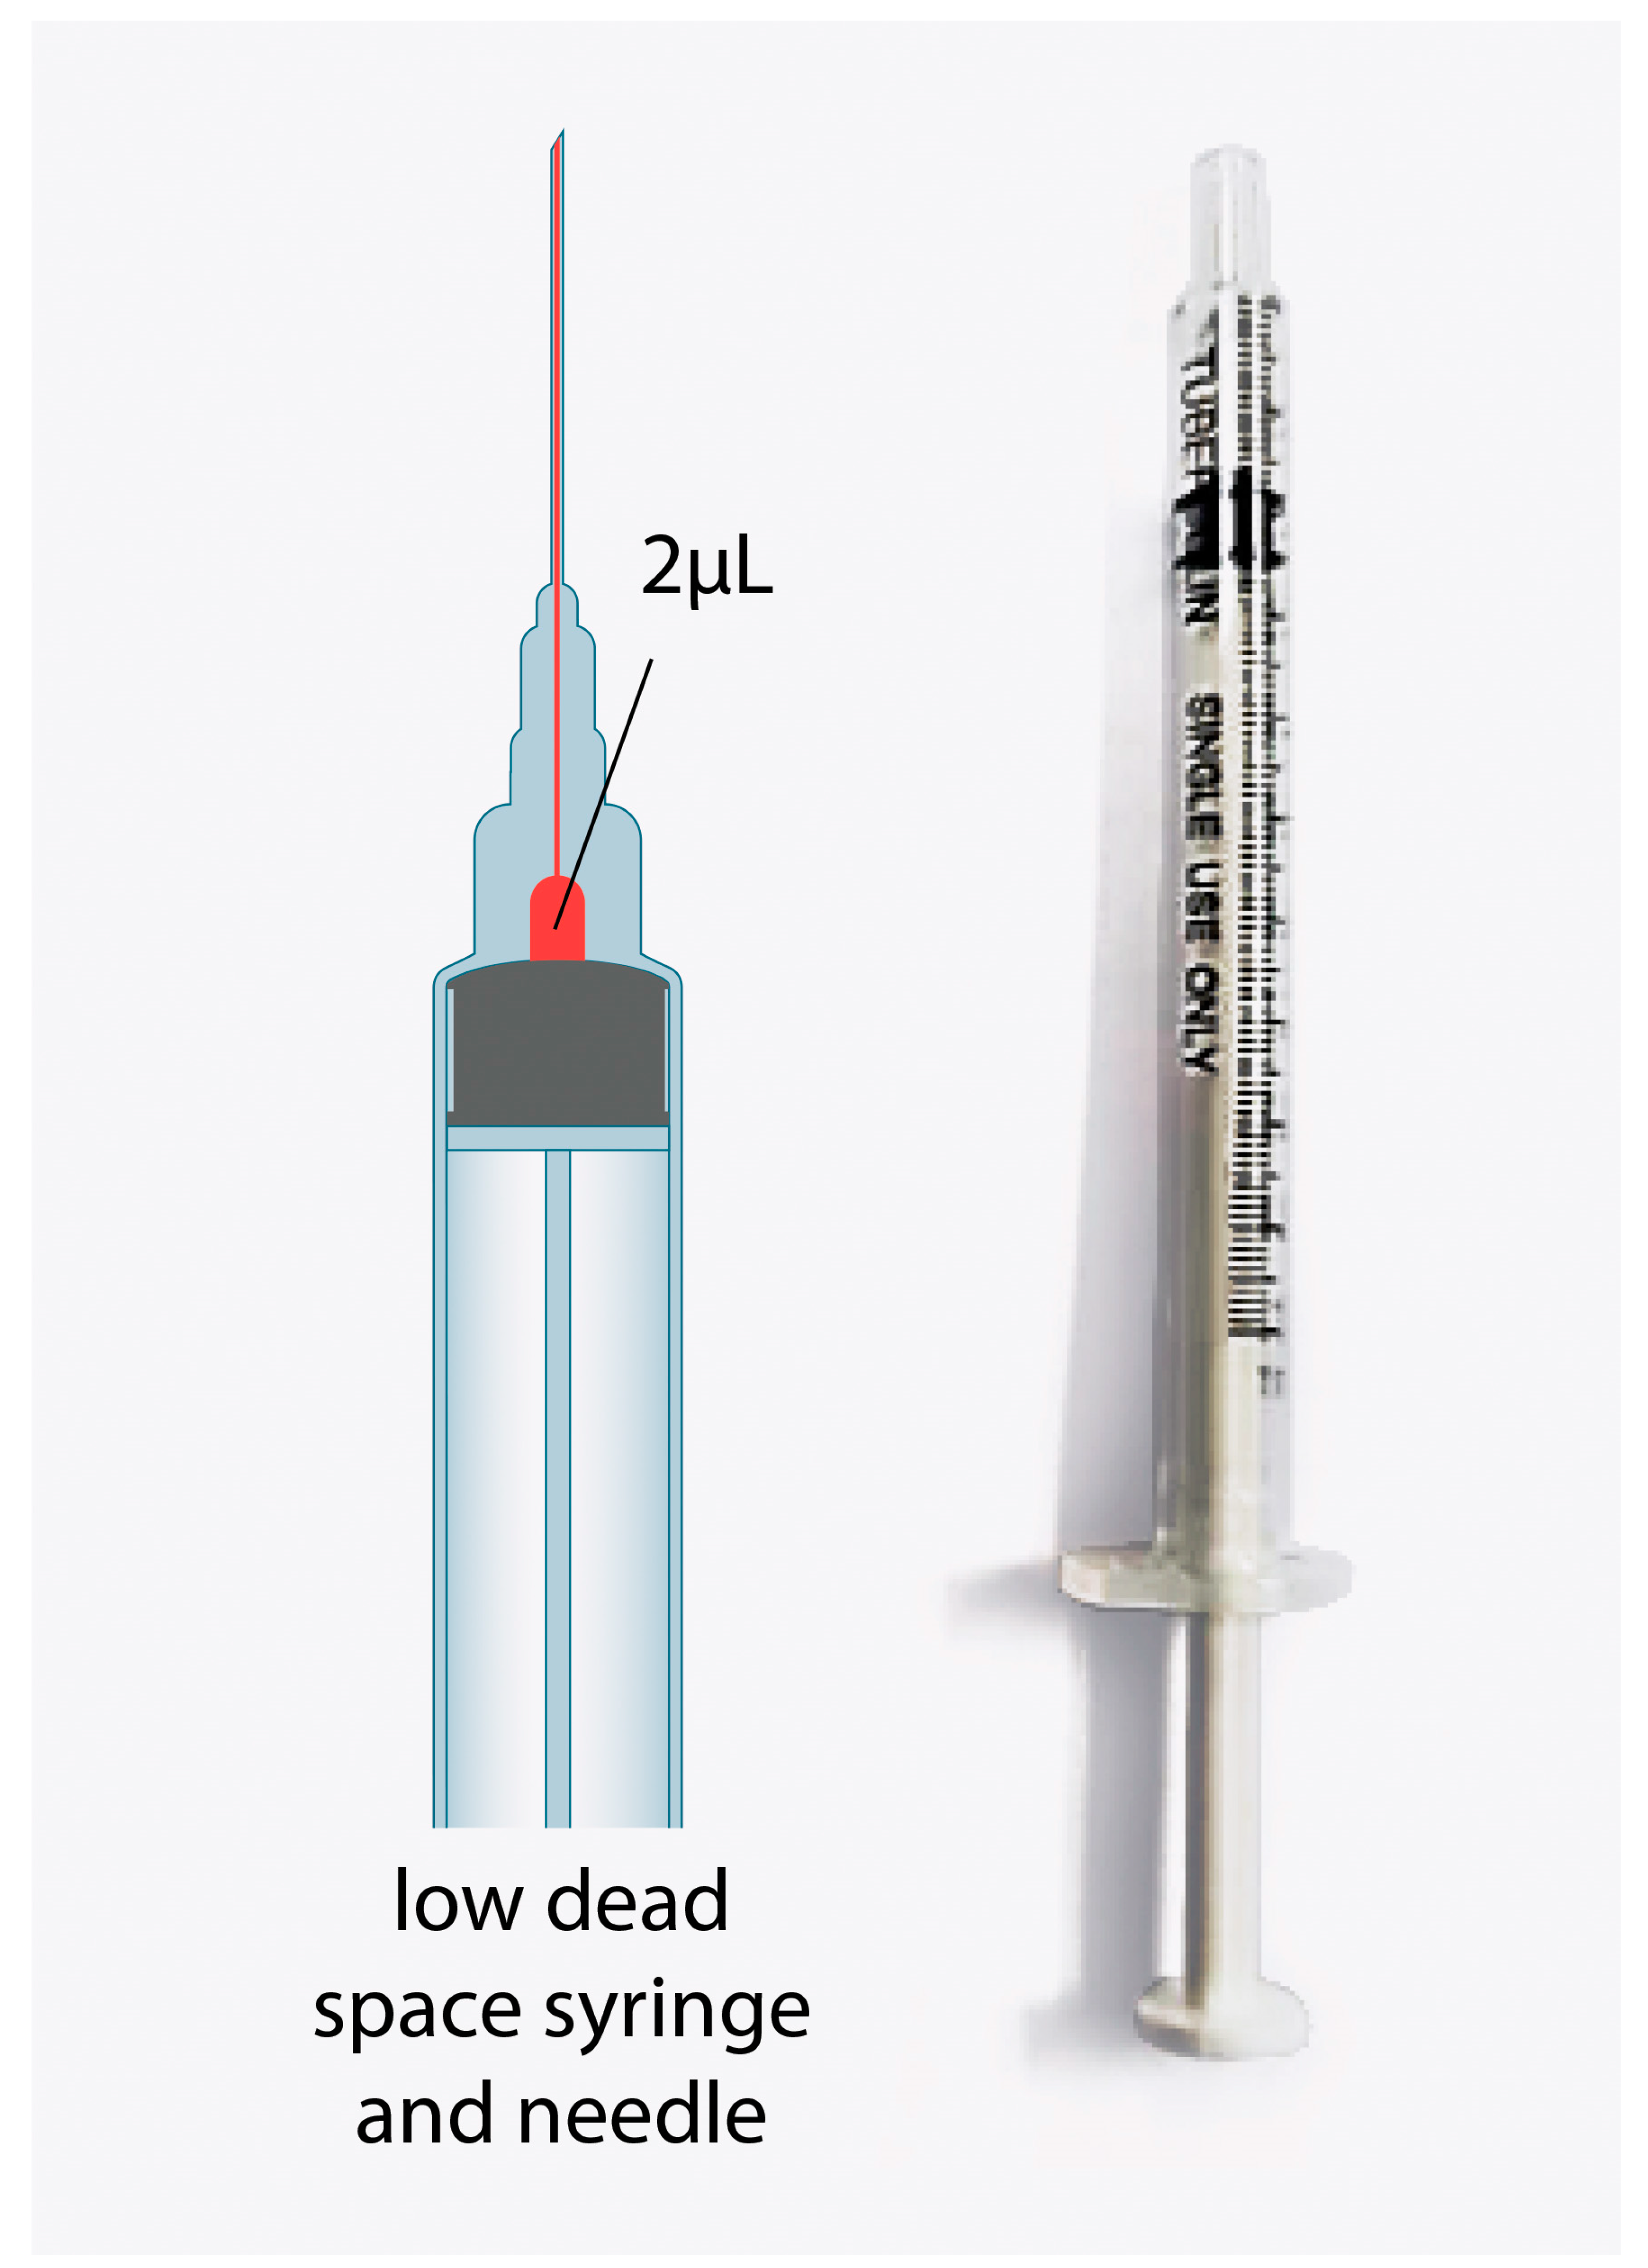 Vaccines | Free Full-Text | Effectiveness of the Air-Filled Technique to  Reduce the Dead Space in Syringes and Needles during ChAdox1-n CoV Vaccine  Administration